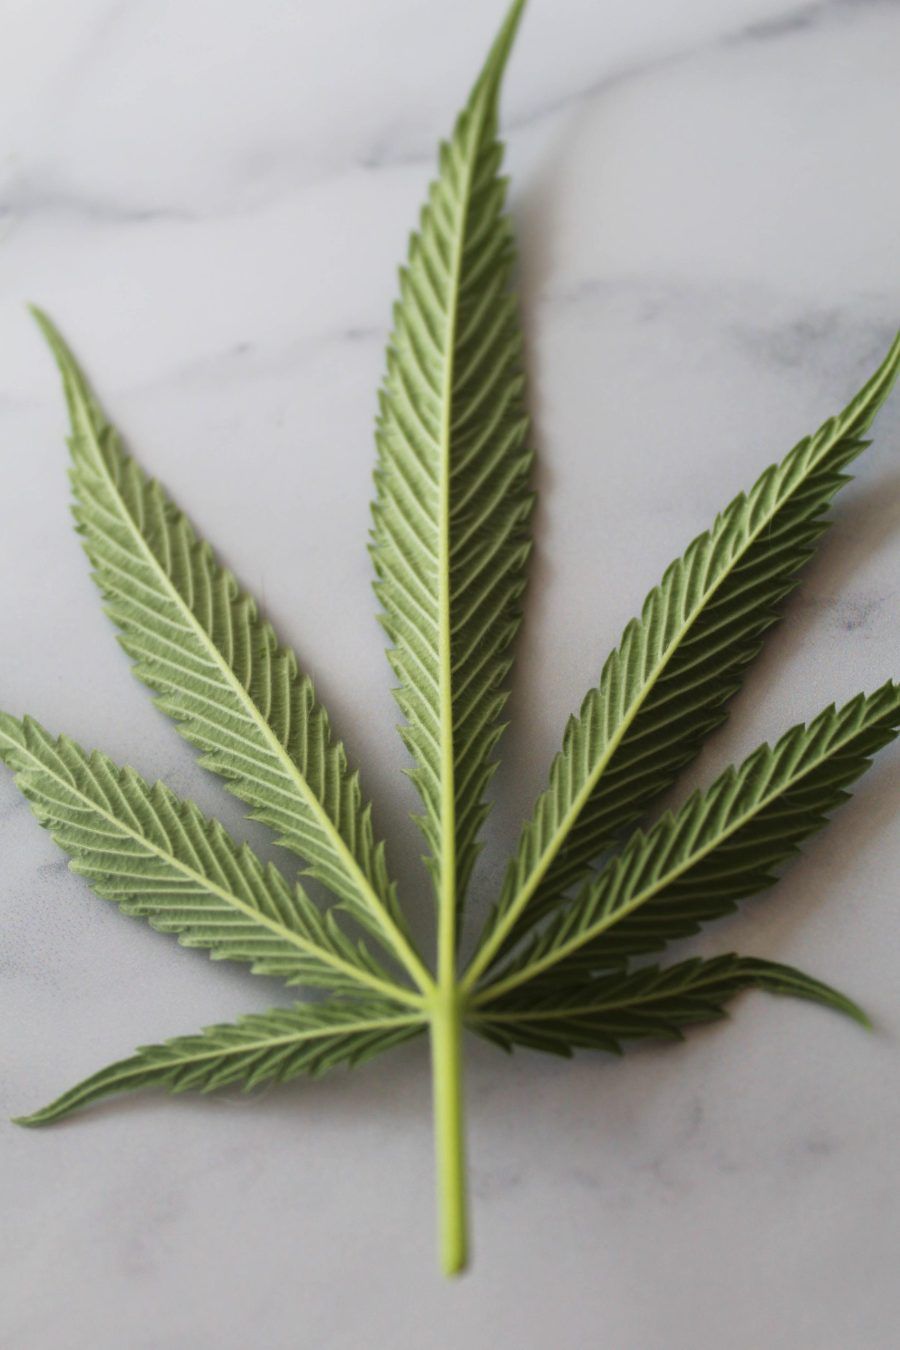 A cannabis leaf sits on a marble background, zoomed in and focused on the leaves details.